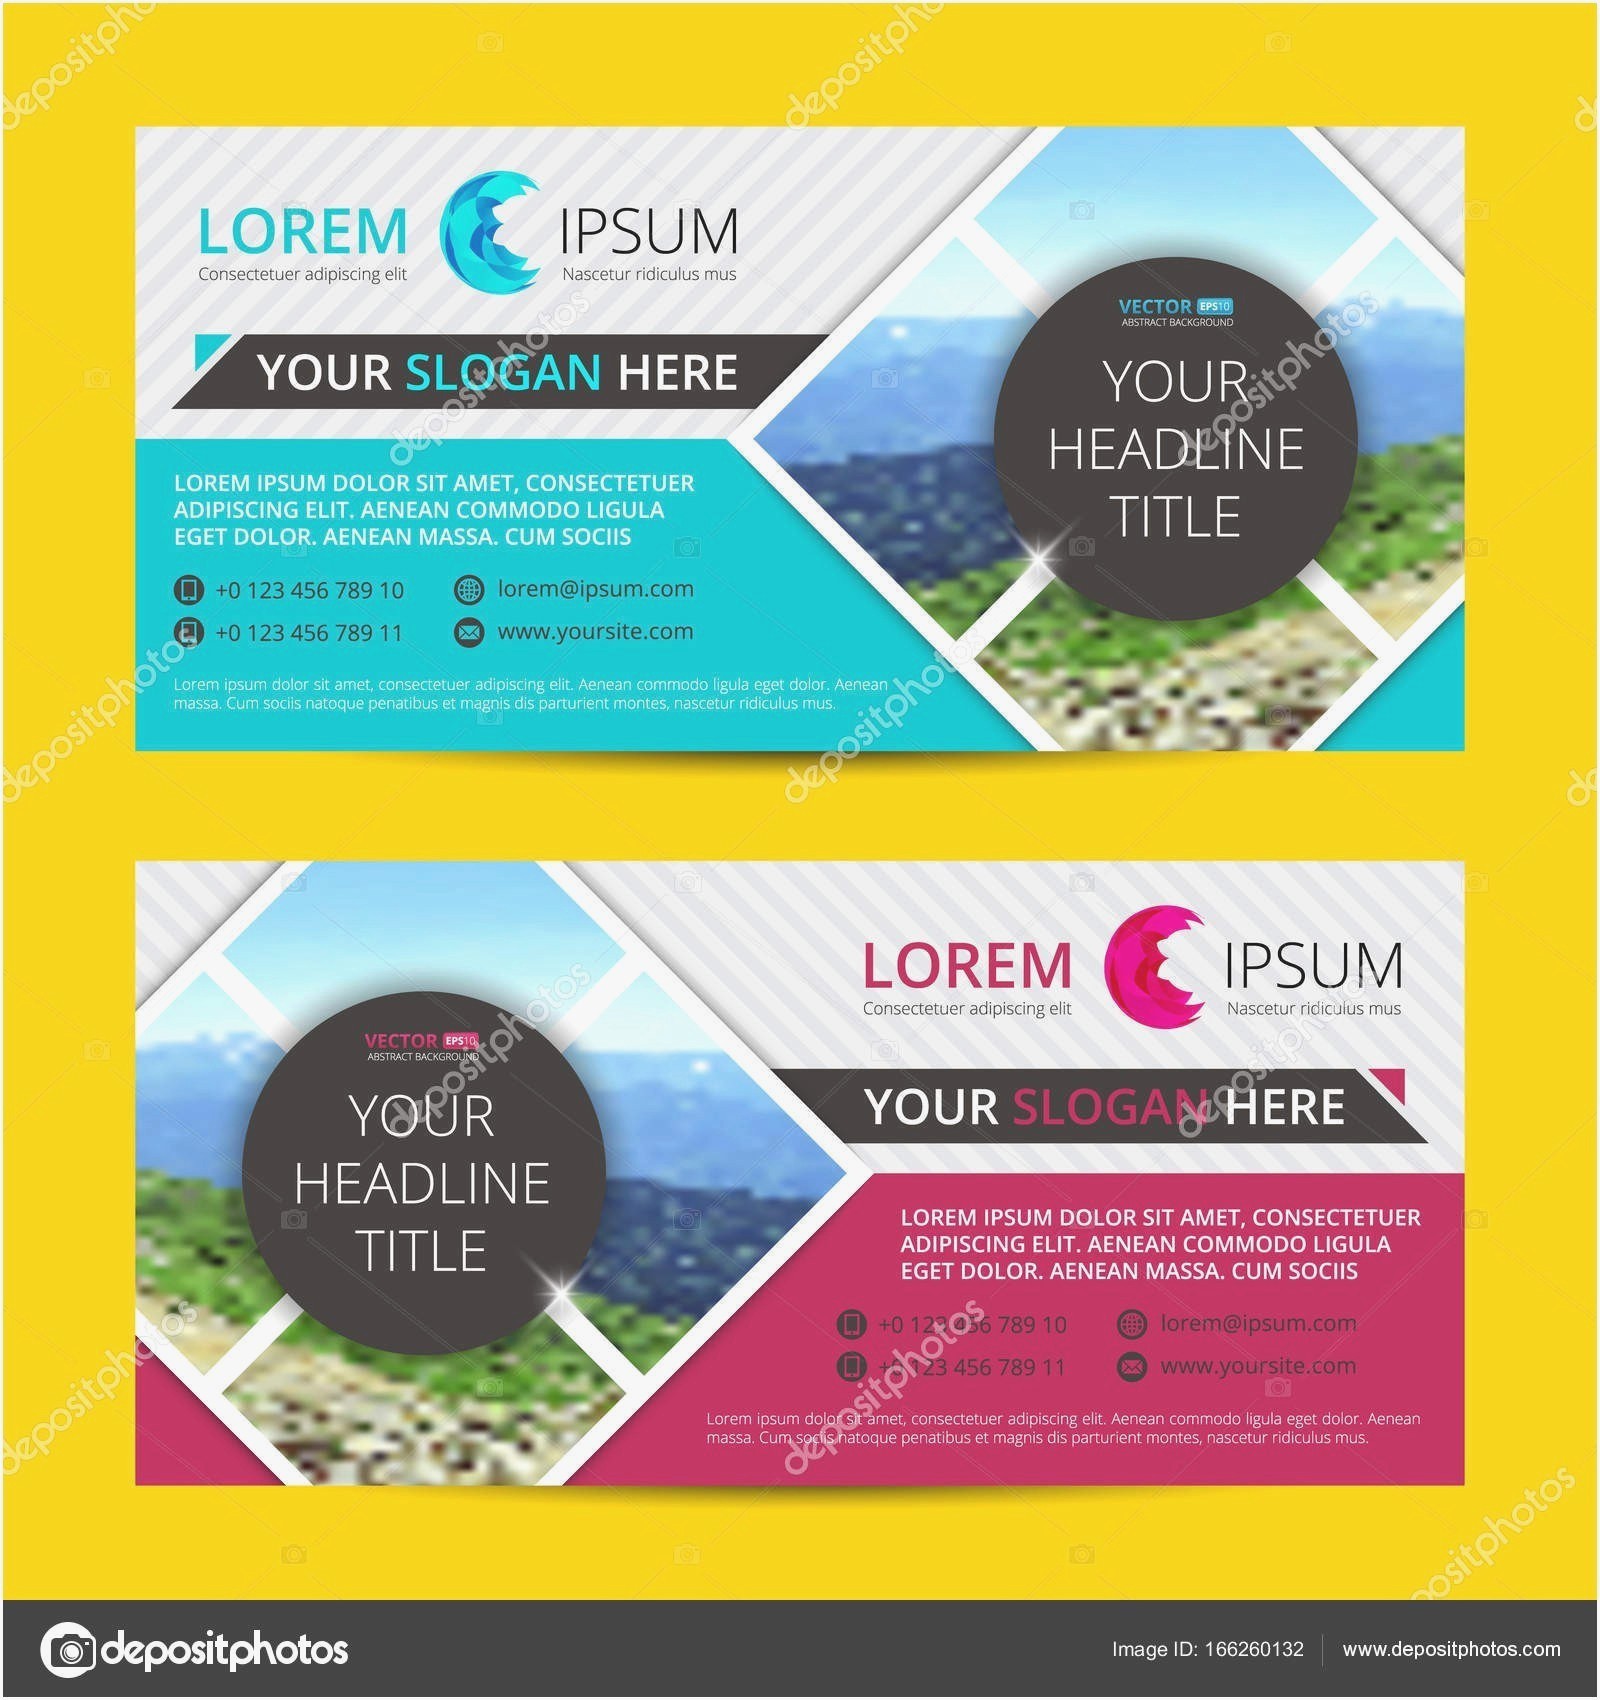 Microsoft Publisher Business Card Templates Fresh Business Cards Design Free Unique Microsoft Publisher